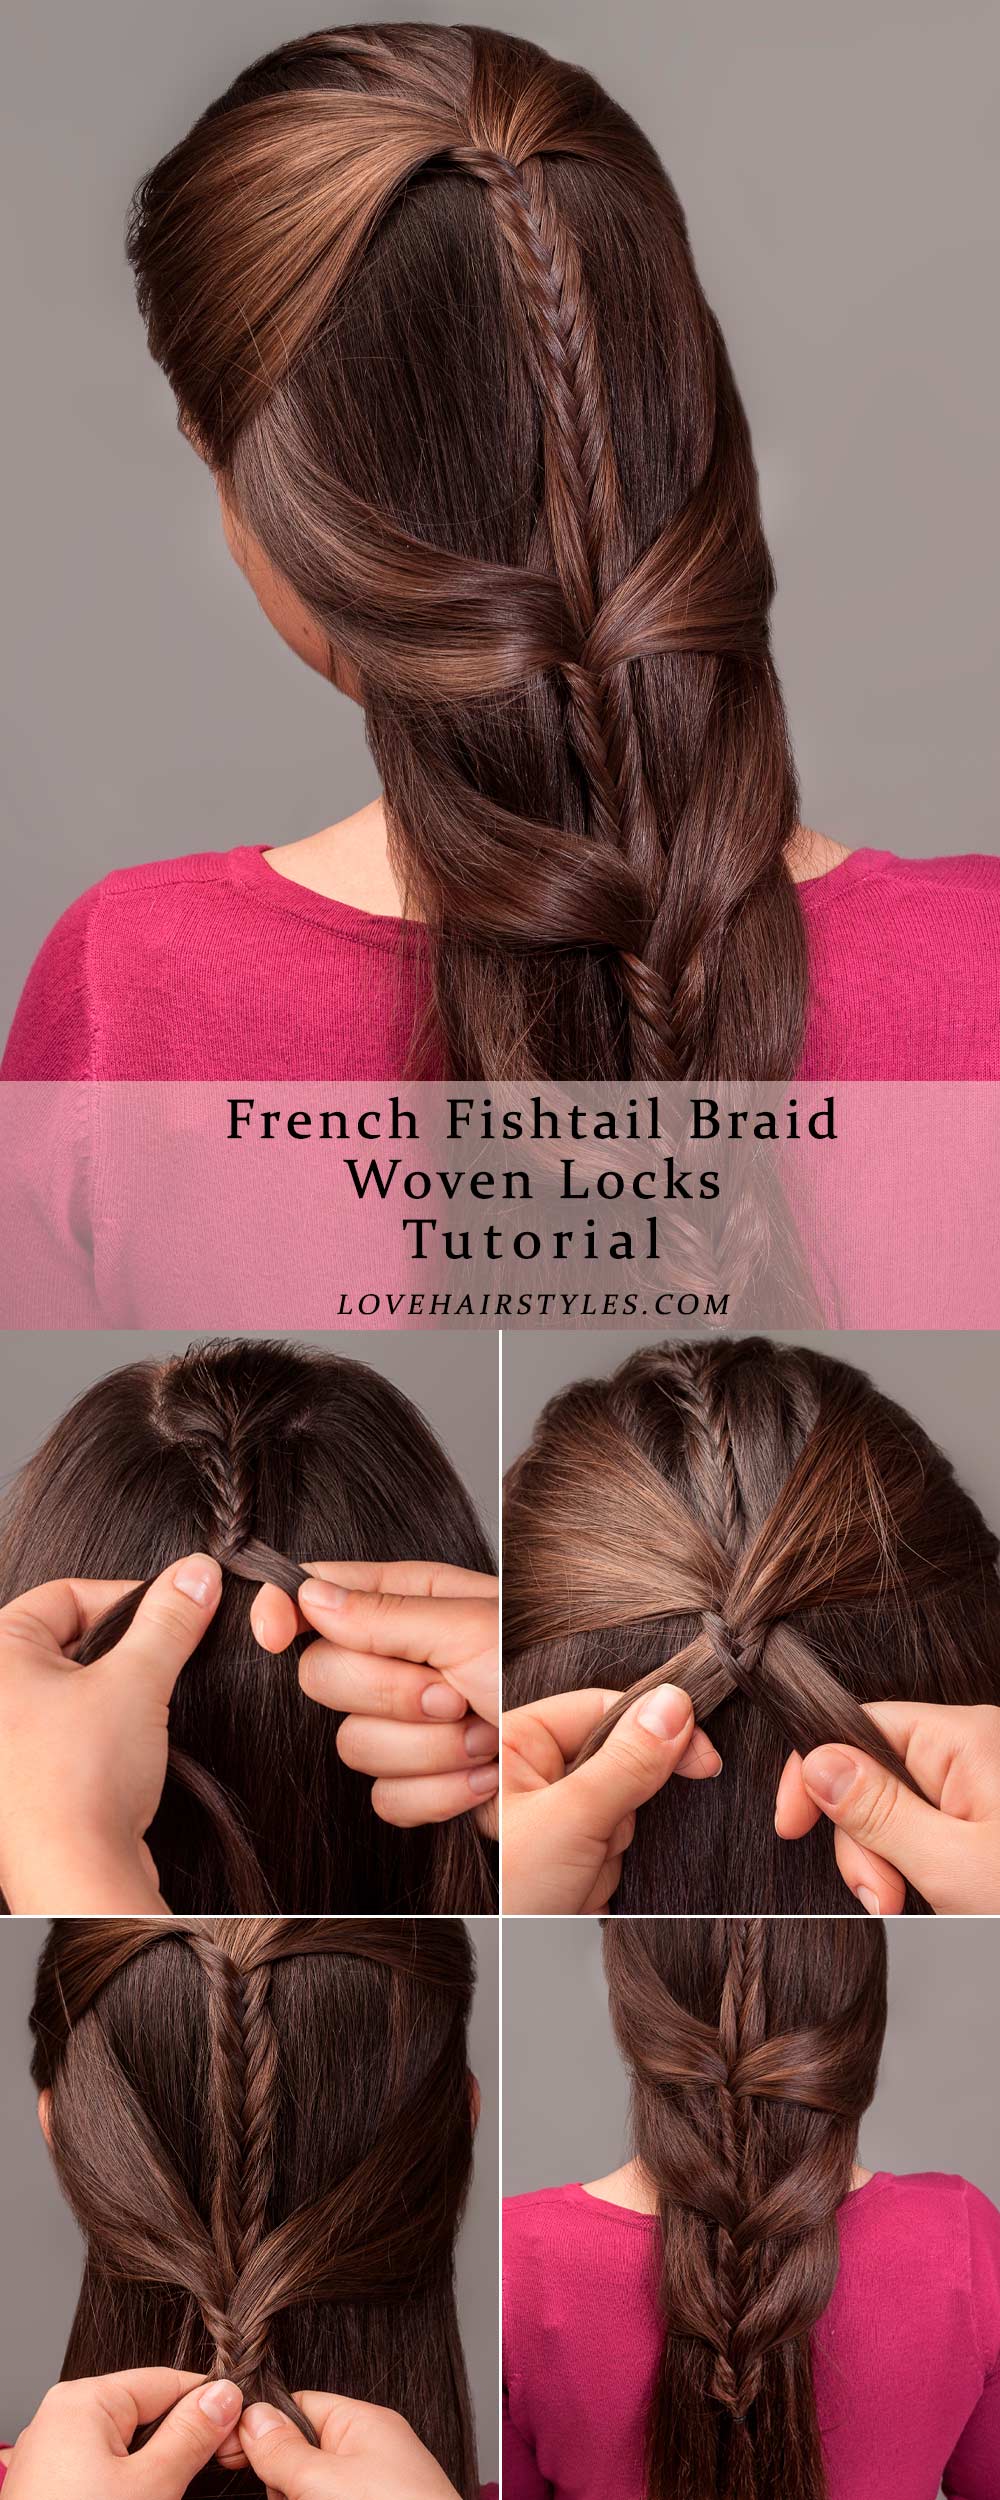 French Fishtail Braid With Woven Locks